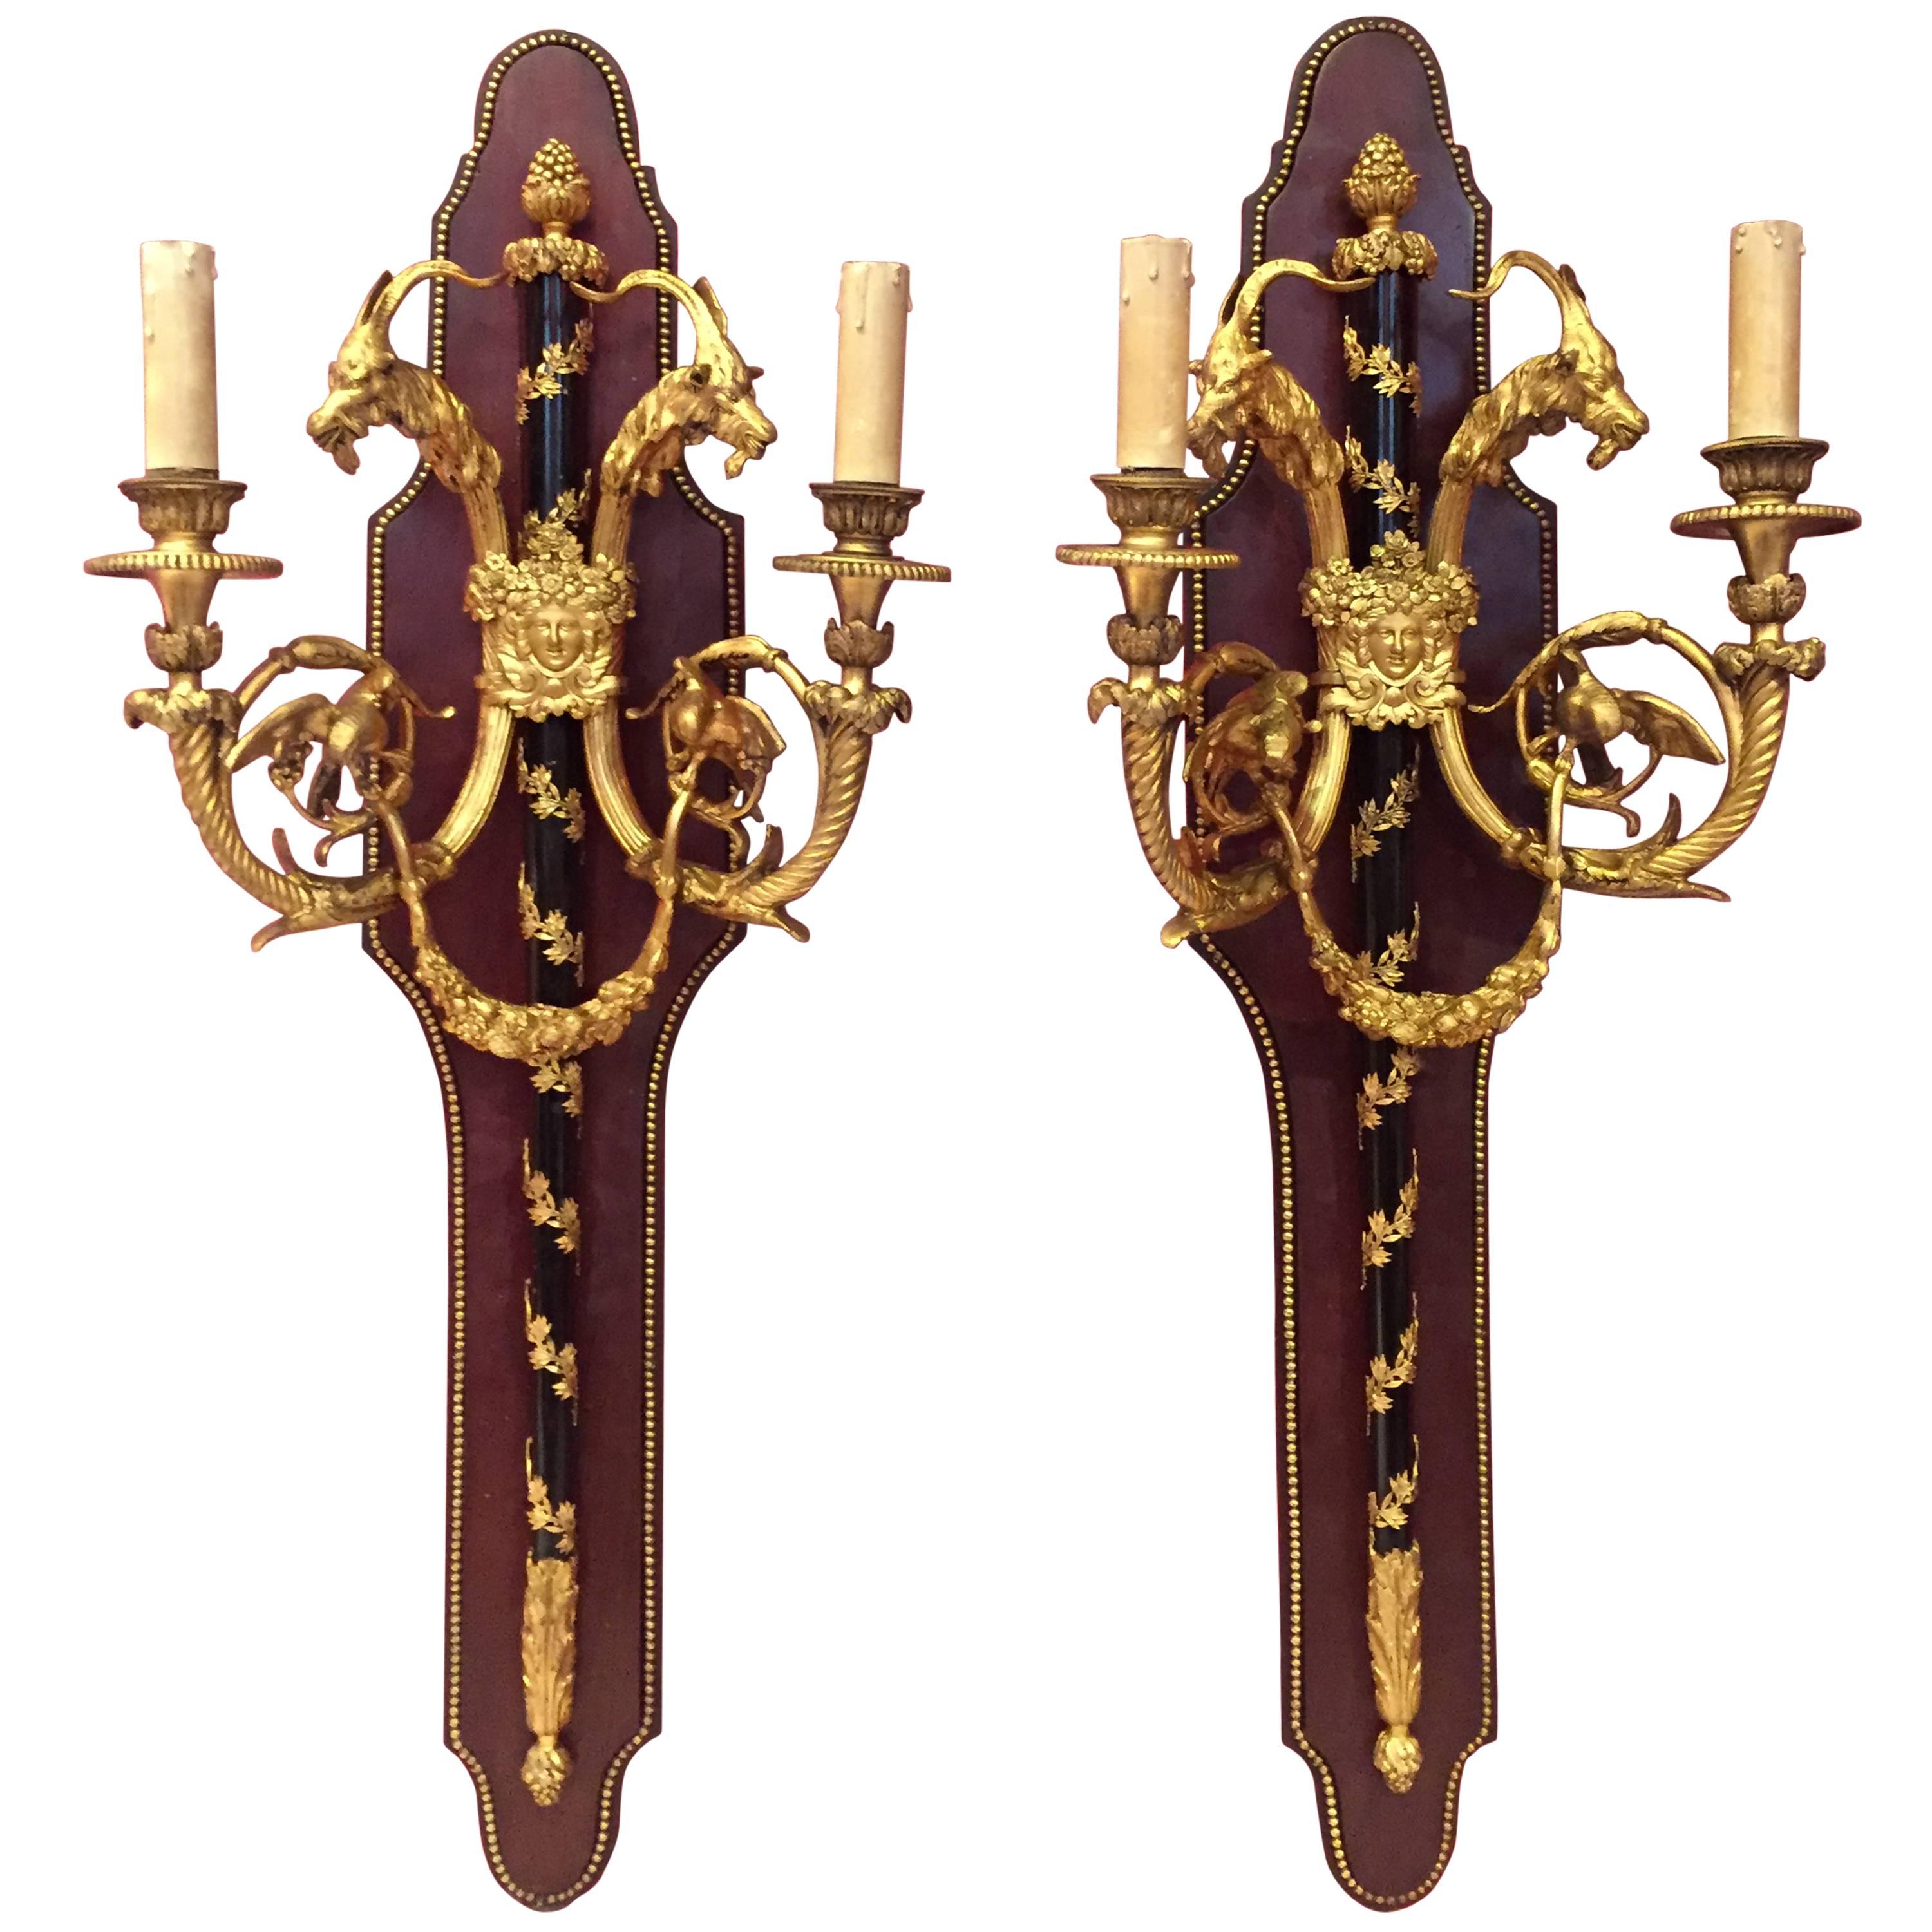 A Pair of 19th Century French Sconces